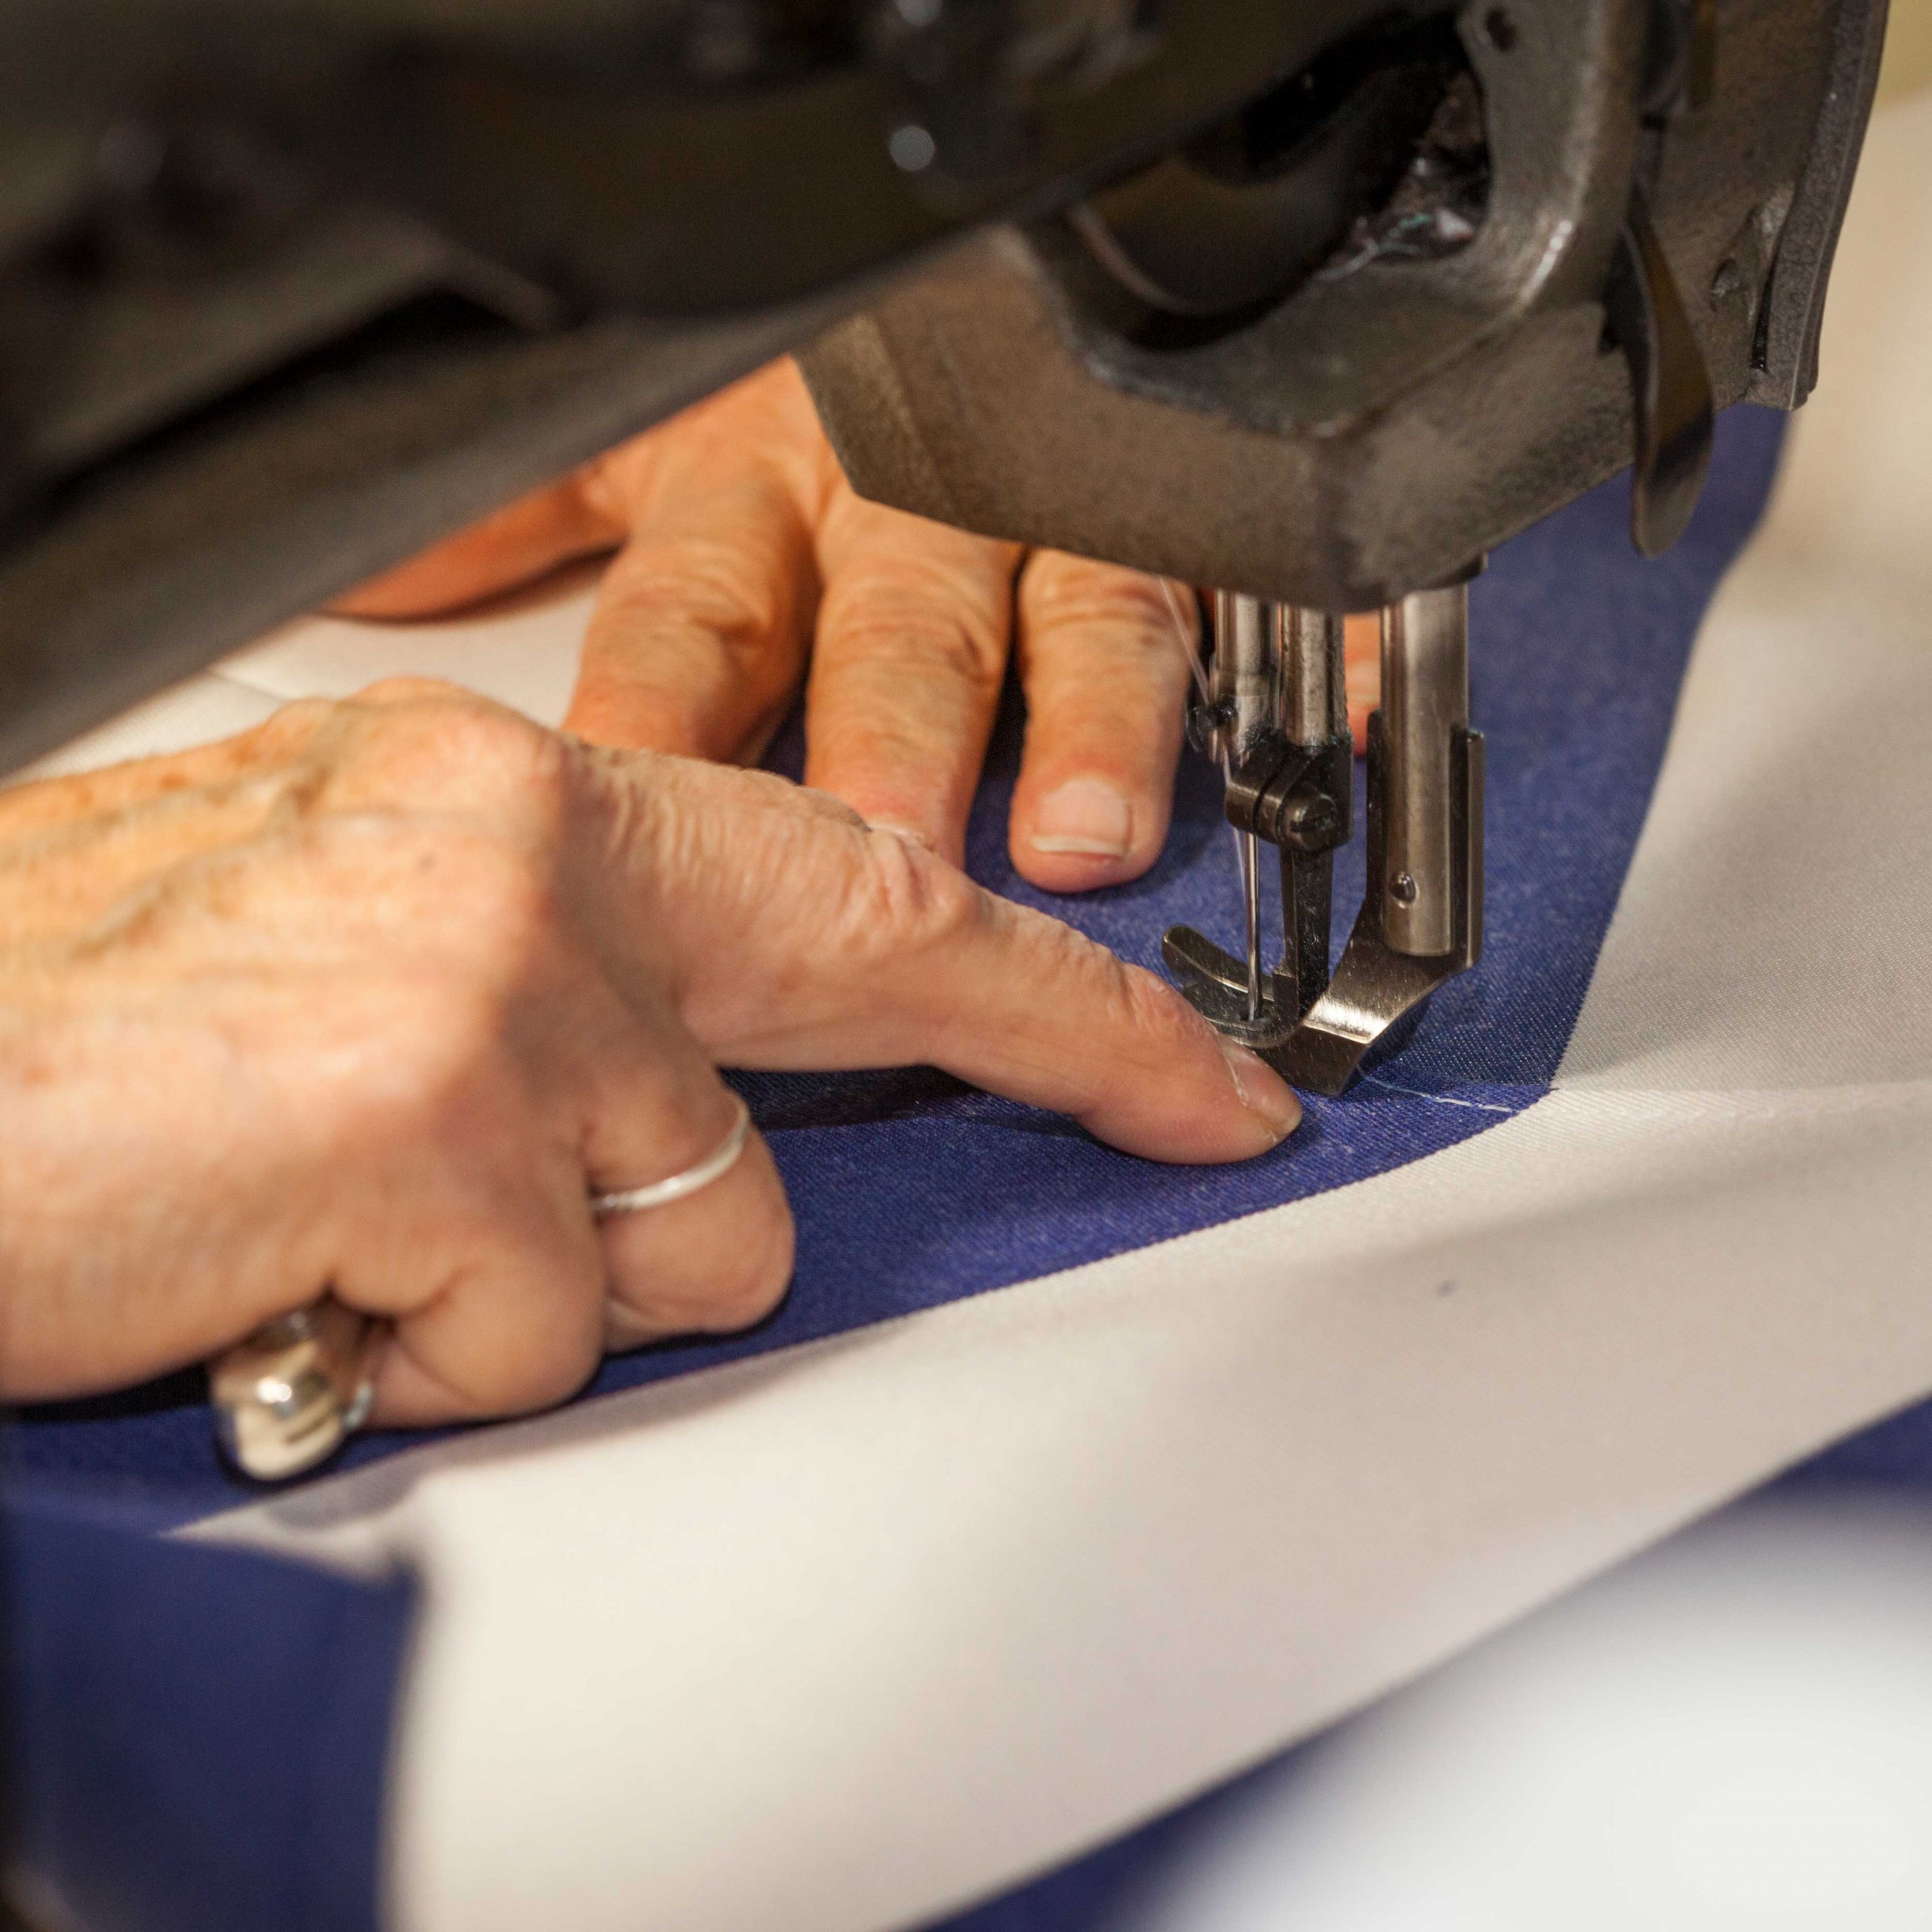 Image of hands sewing